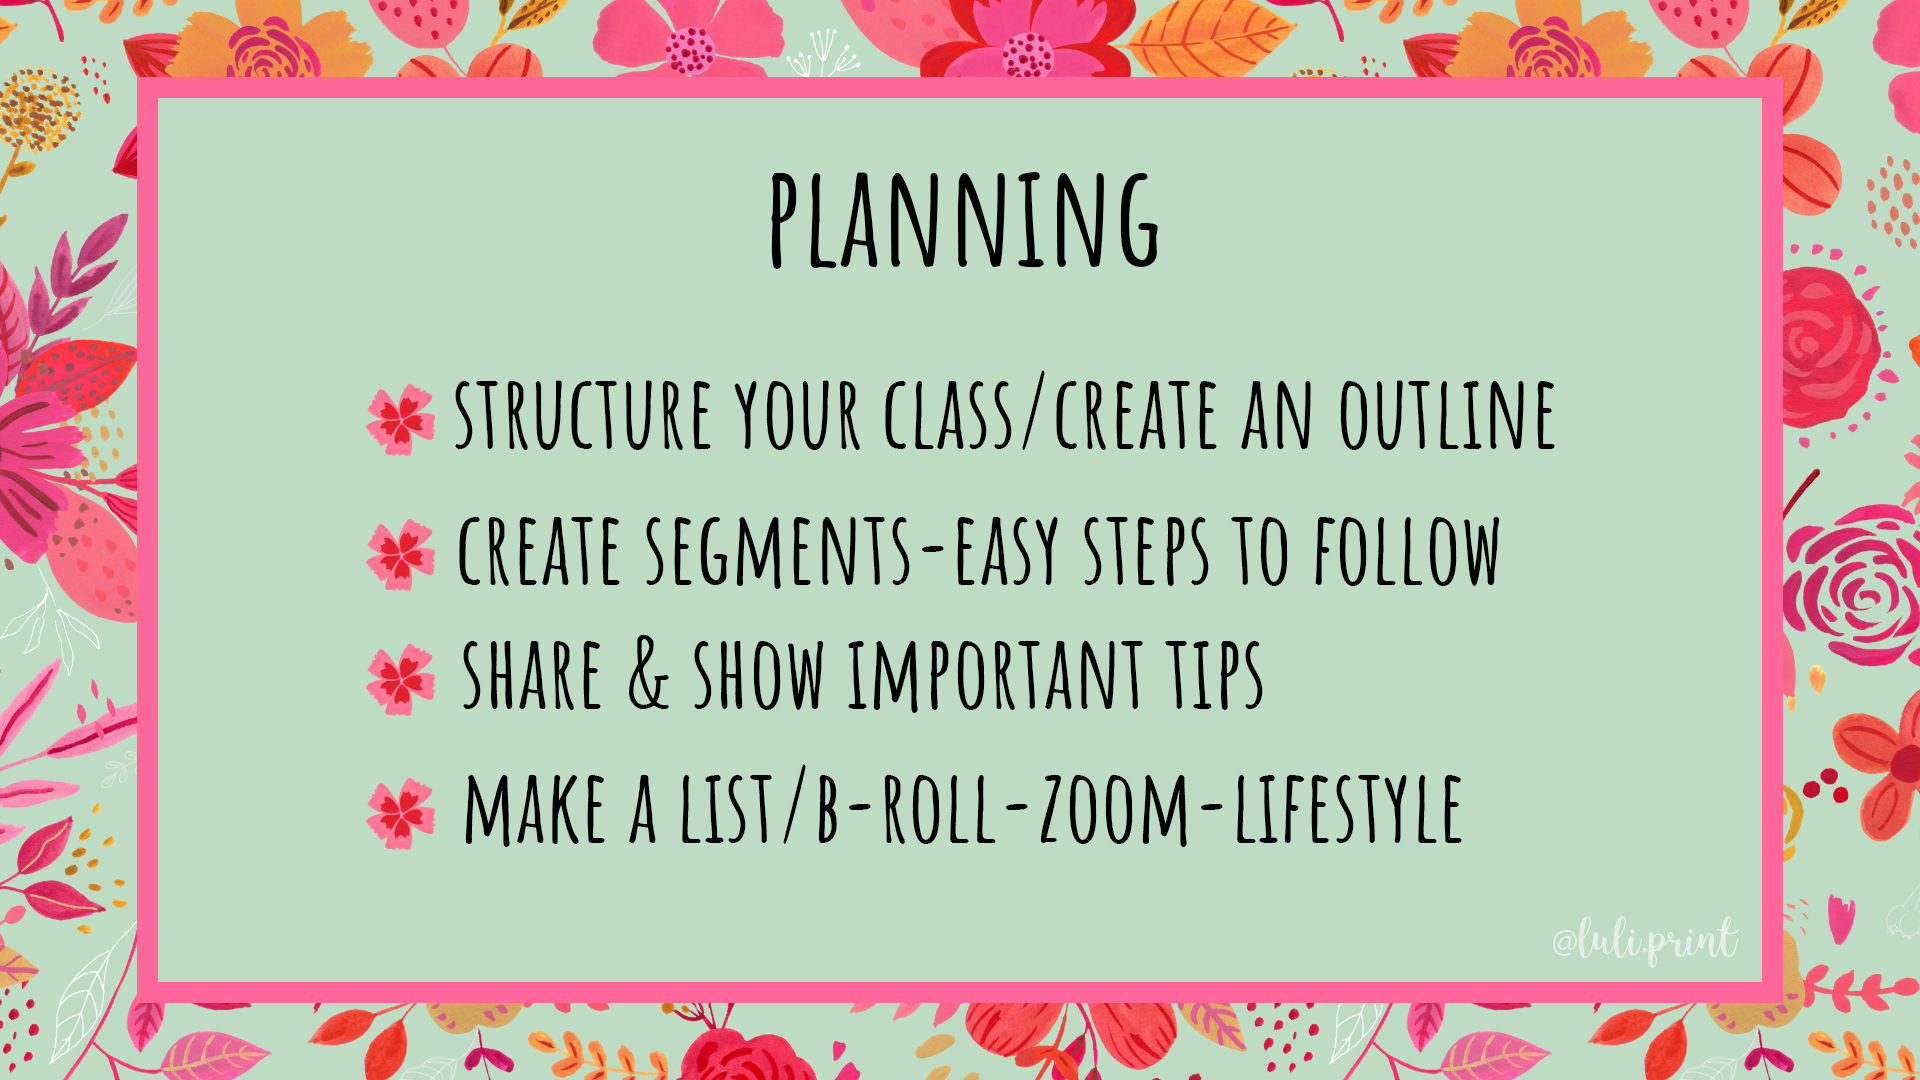 Image of a slide from the webinar with a pink floral border. In black all caps, the word “Planning” is at the top of the slide inside of a large mint text box. Underneath are four bullet points in the shape of pink flowers with the following points, also in black all caps font, “Structure your class/Create an outline,” “Create segments-easy steps to follow,” “Share and show important tips” and “Make a list/B-roll-oom-lifestyle.”